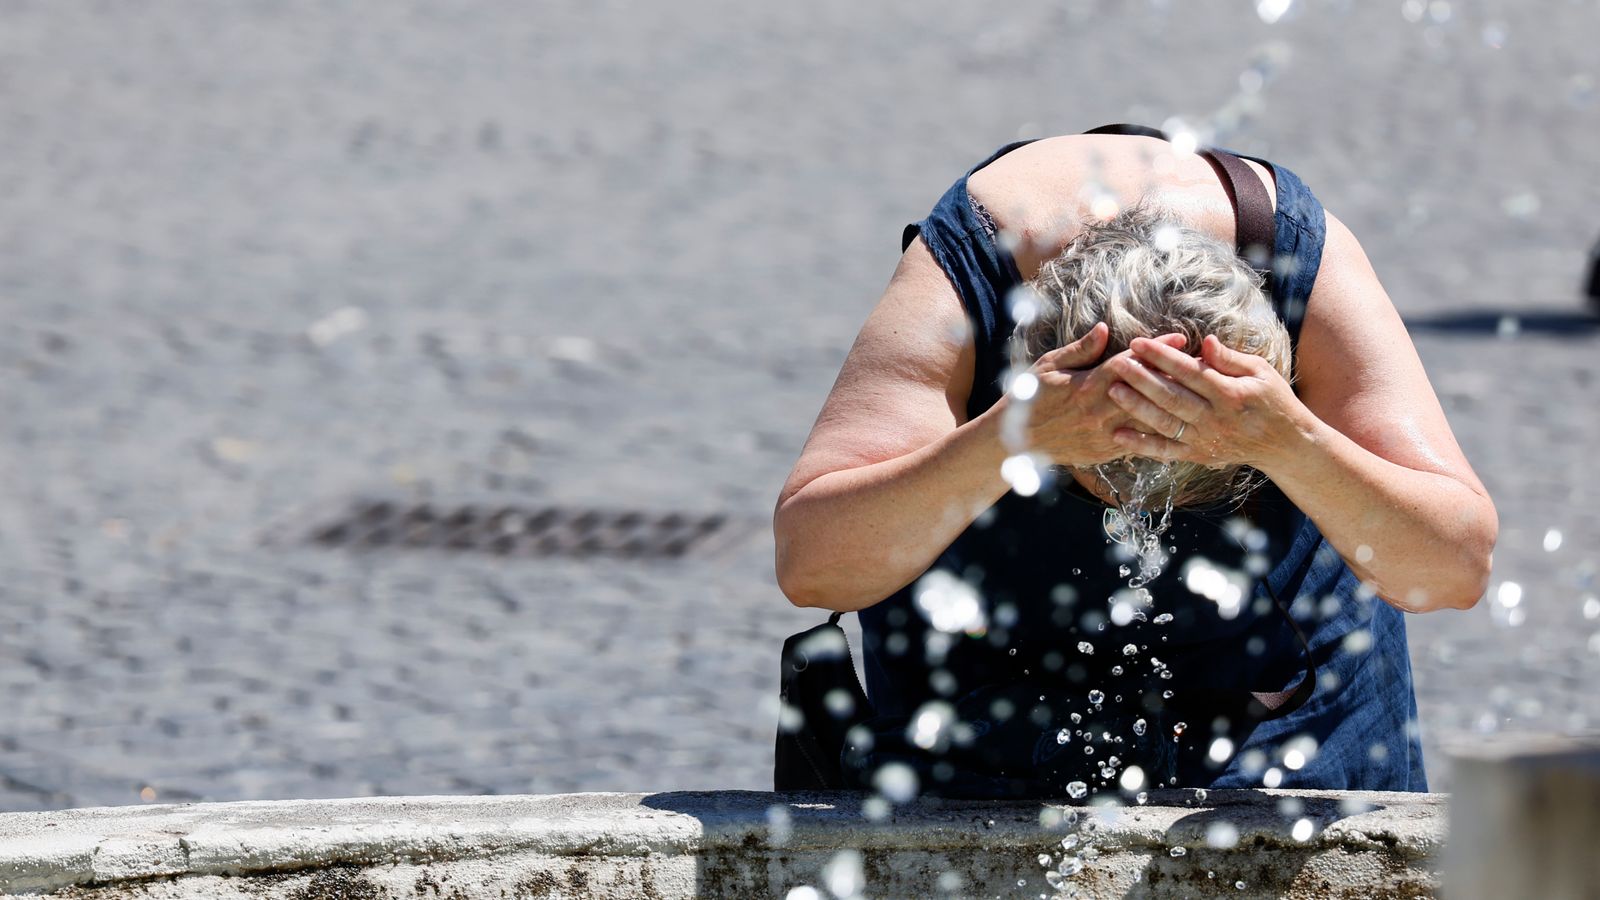 How hot is it in Greece, Spain, Portugal, France, and other parts of Europe?